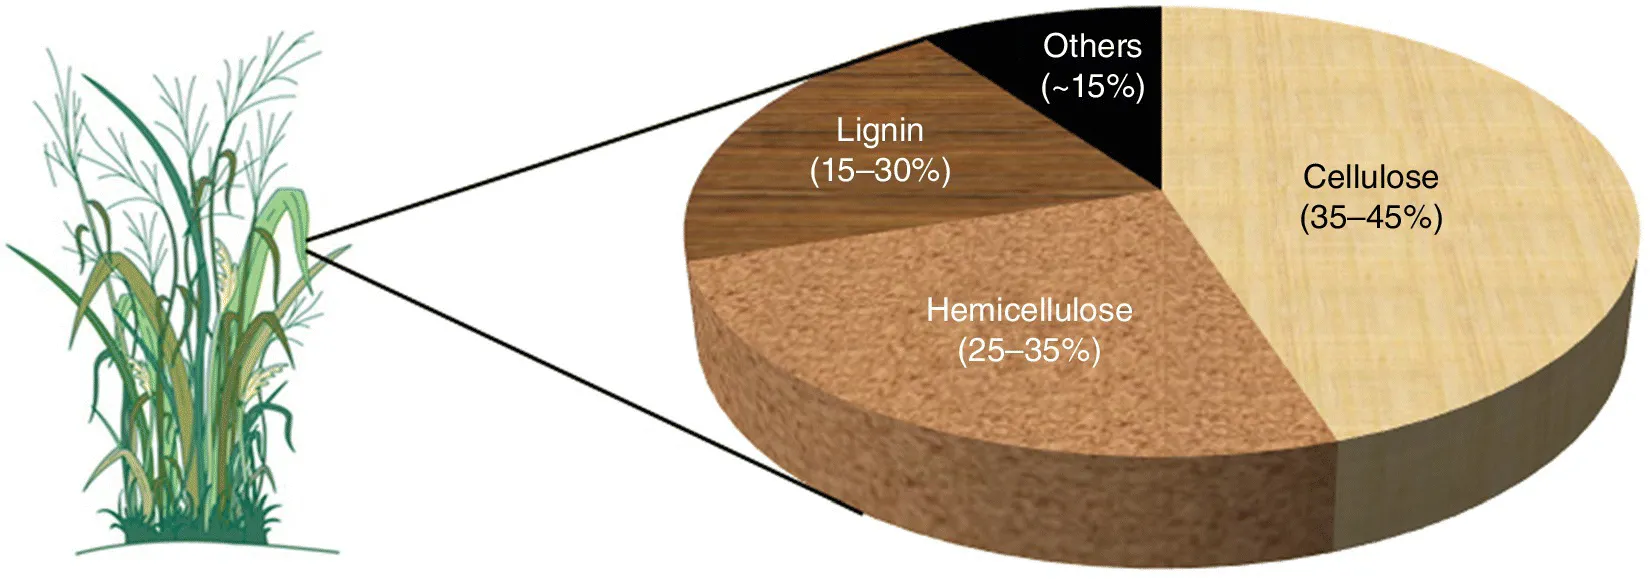 3-Dimensional pie chart of chemical composition of lignocellulosic biomass consisting of lignin (15 to 30%), hemicellulose (25 to 35%), cellulose (35 to 45%), and others (15%).